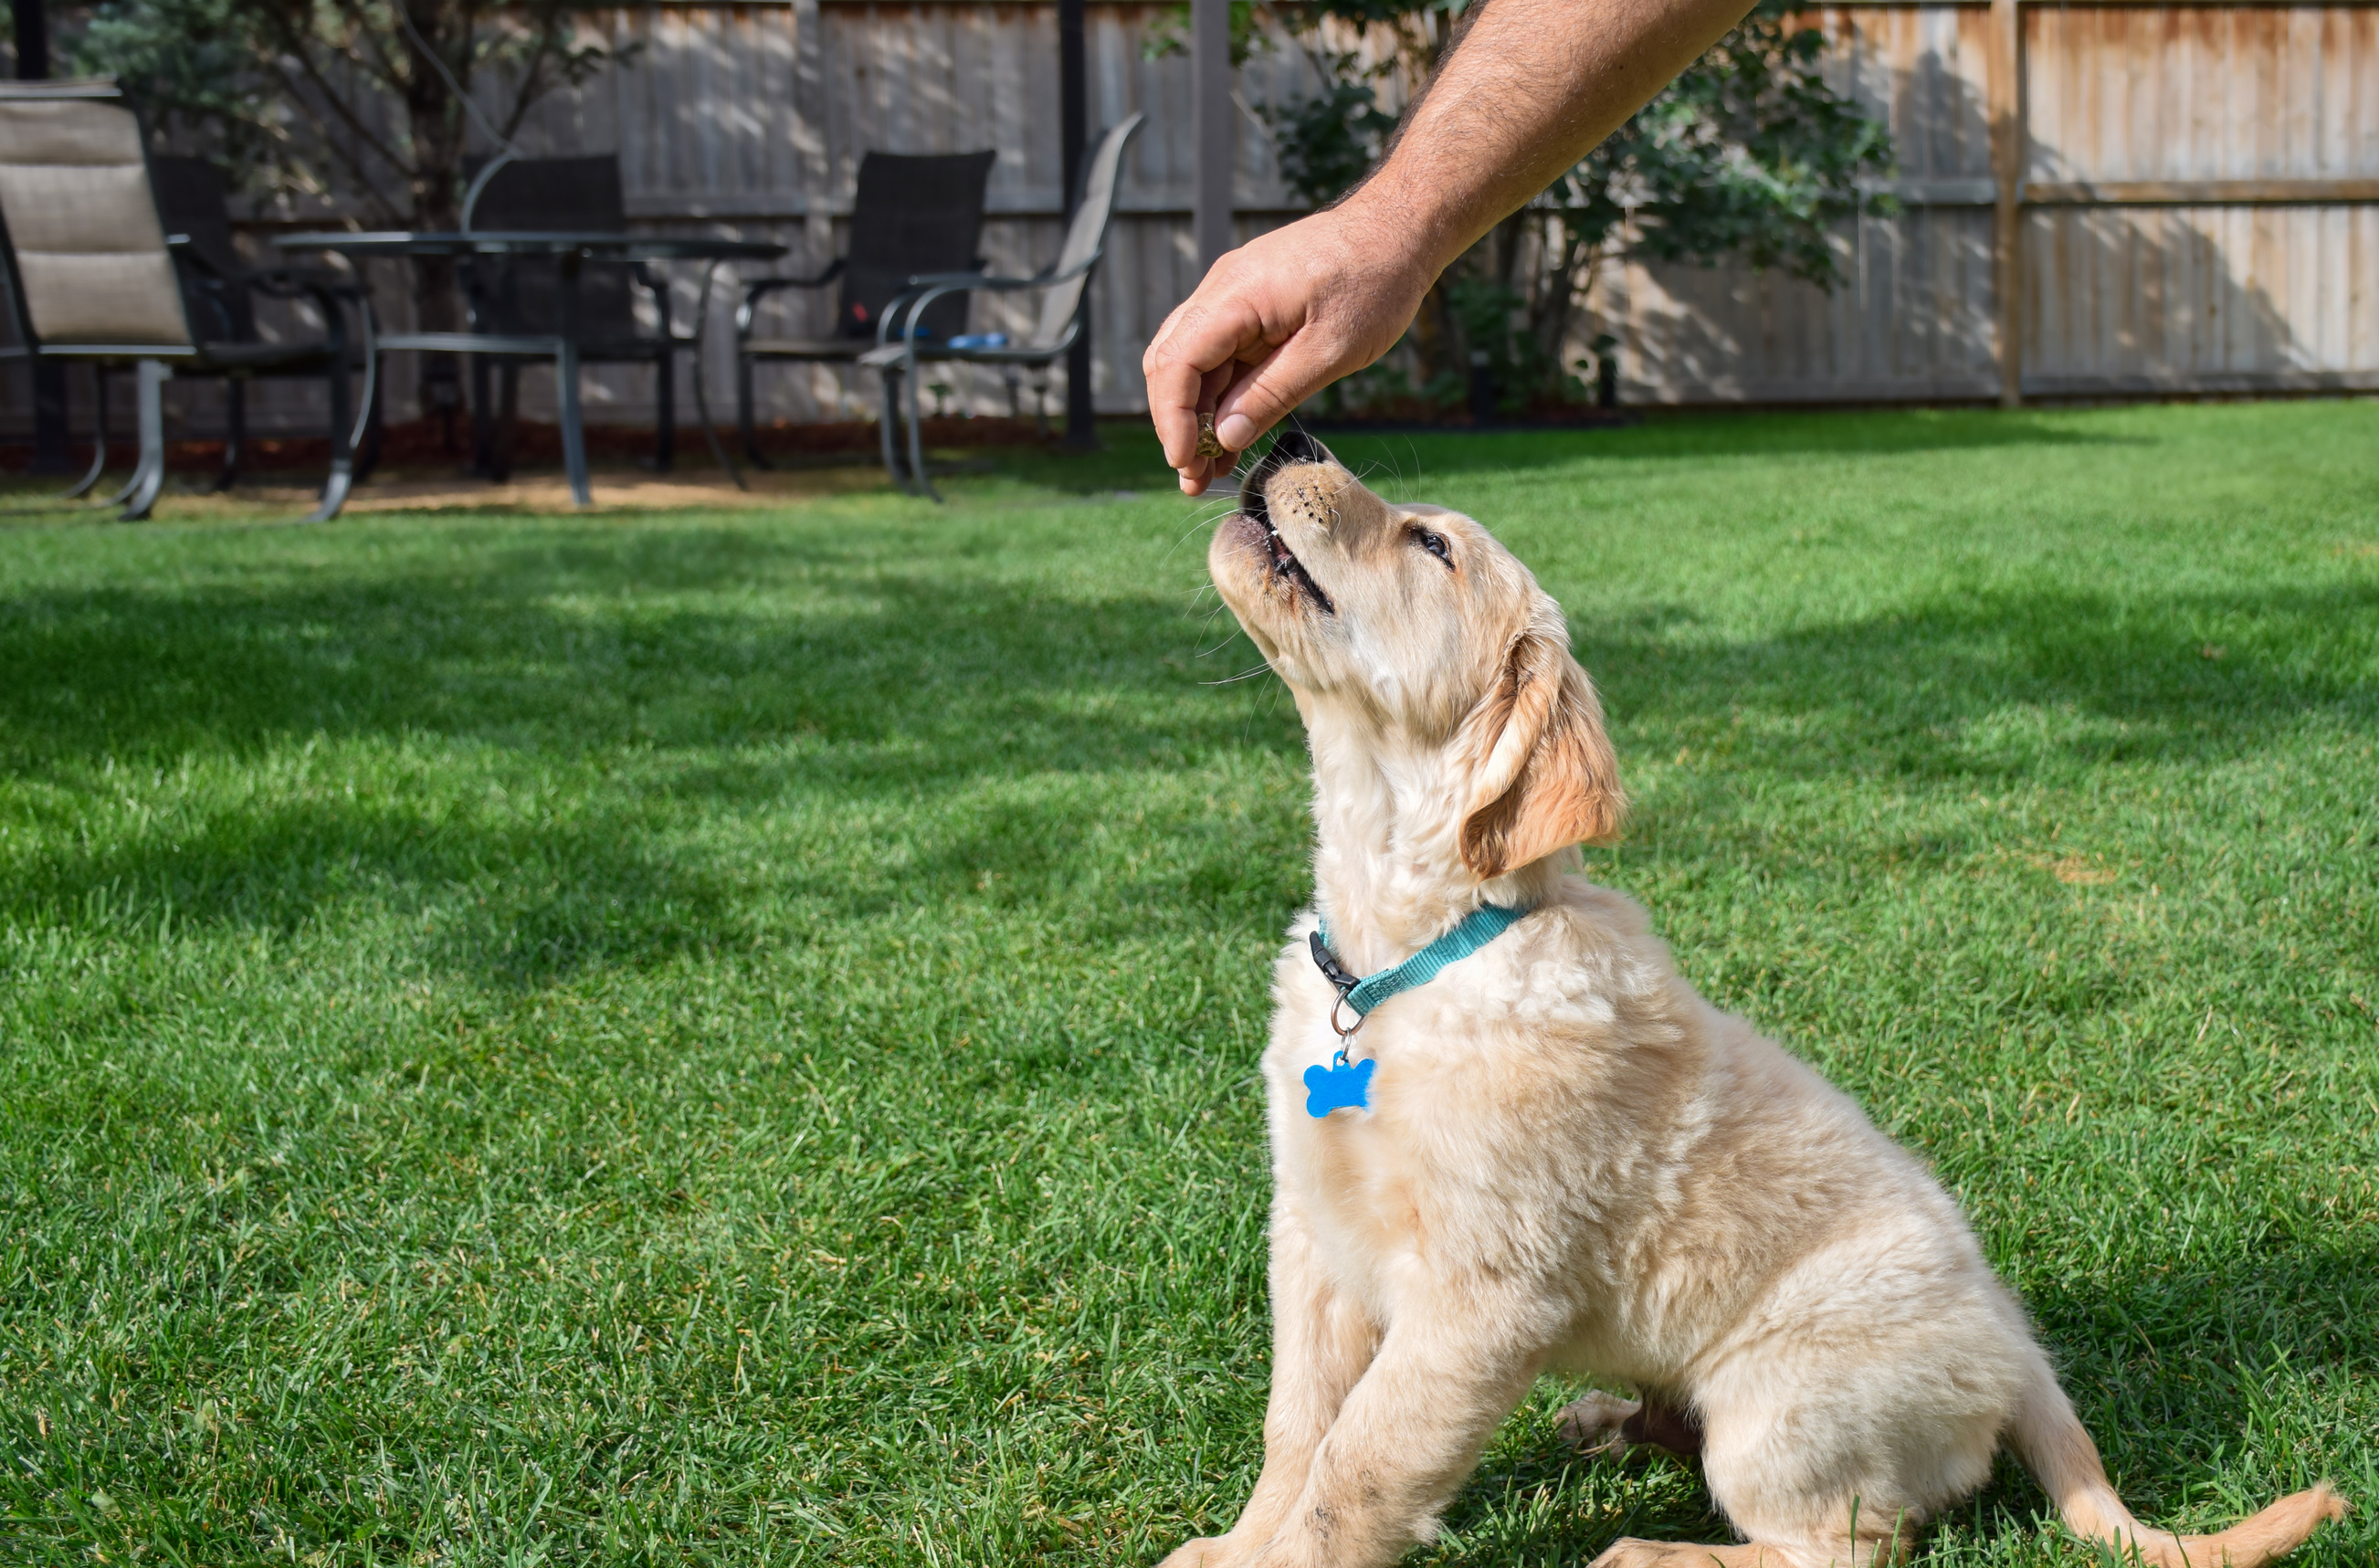 Golden retriever puppy getting a treat during puppy training on